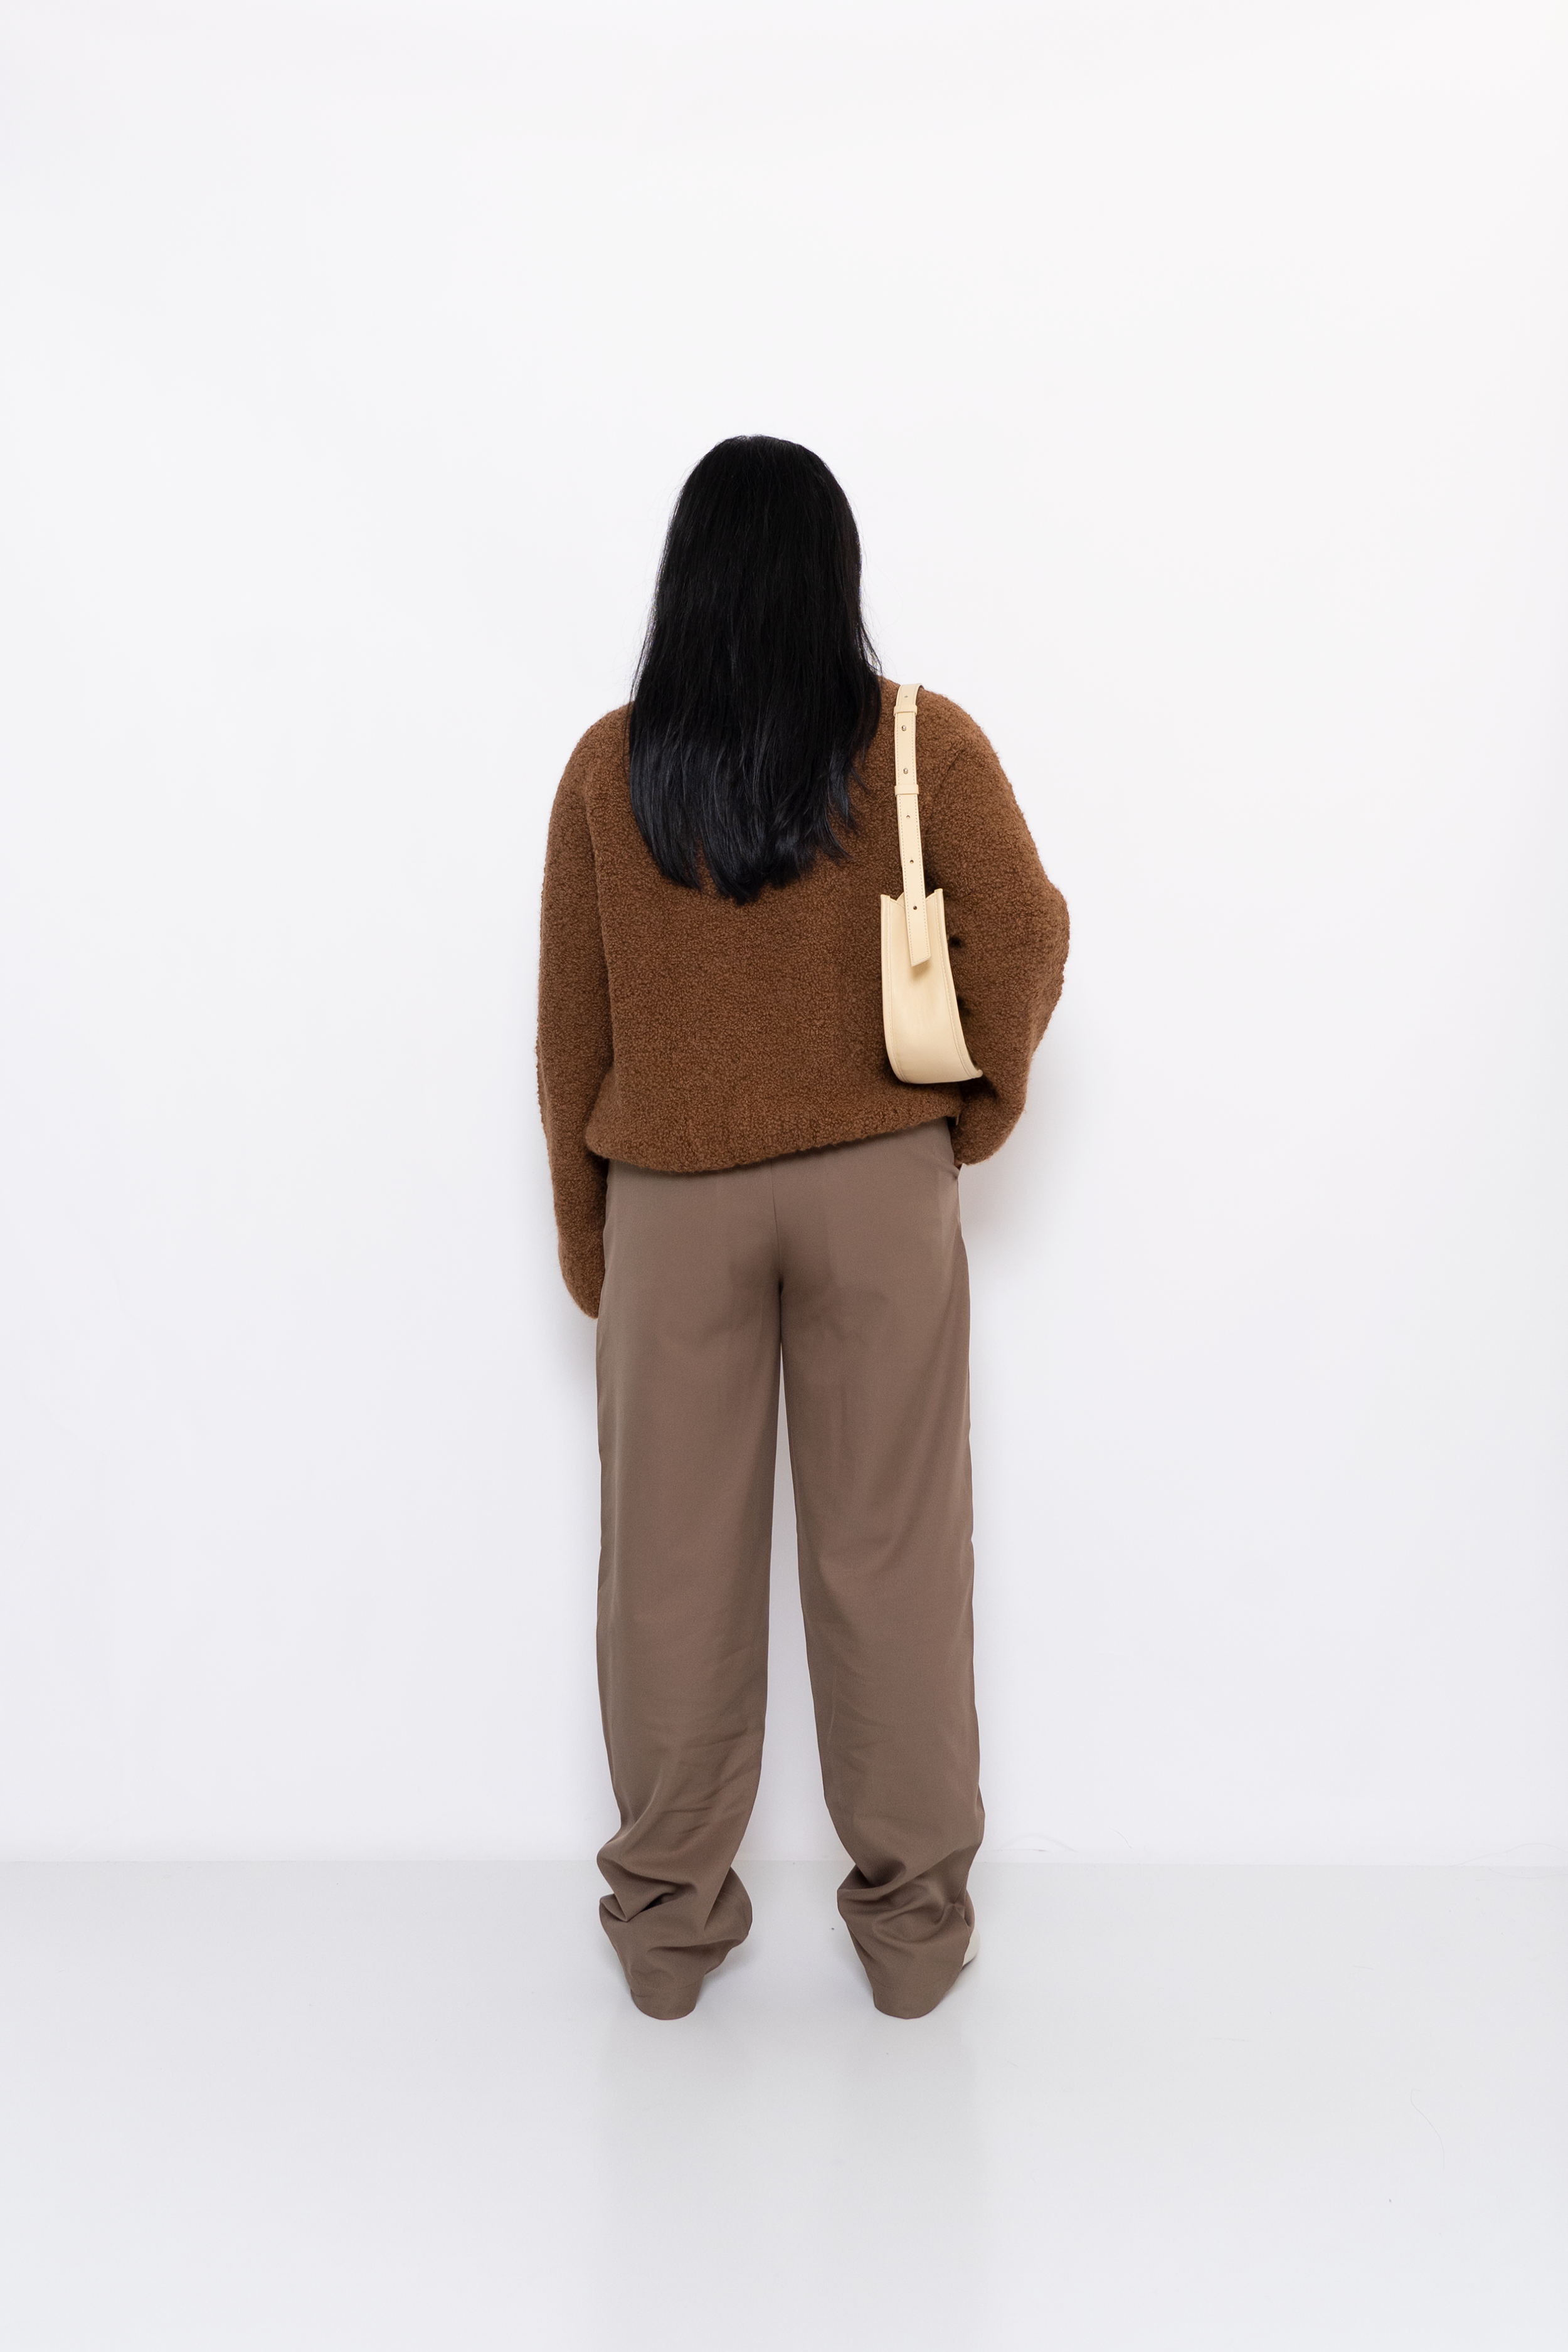 NOTHING WRITTEN SOMME BOUCLE ROUND SLEEVE KNIT CAMEL